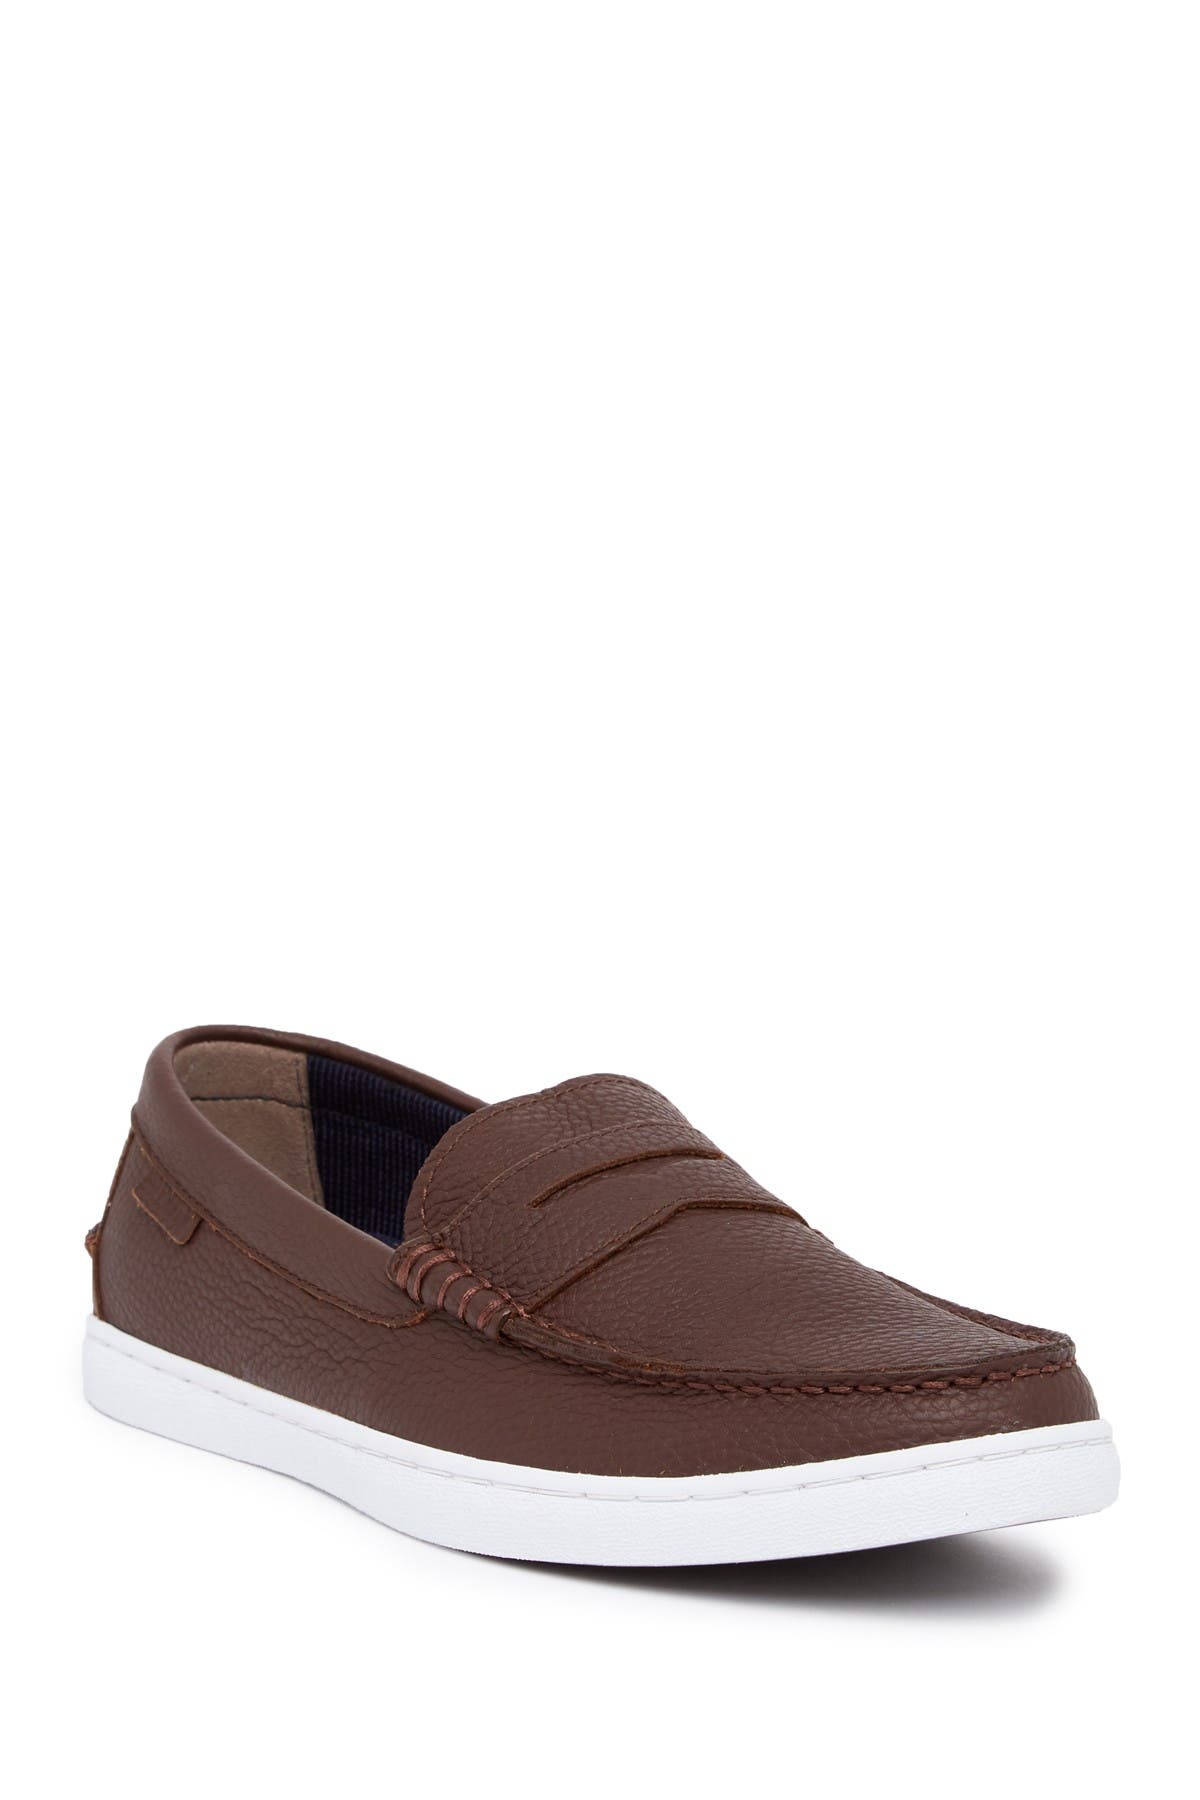 cole haan nantucket penny loafer